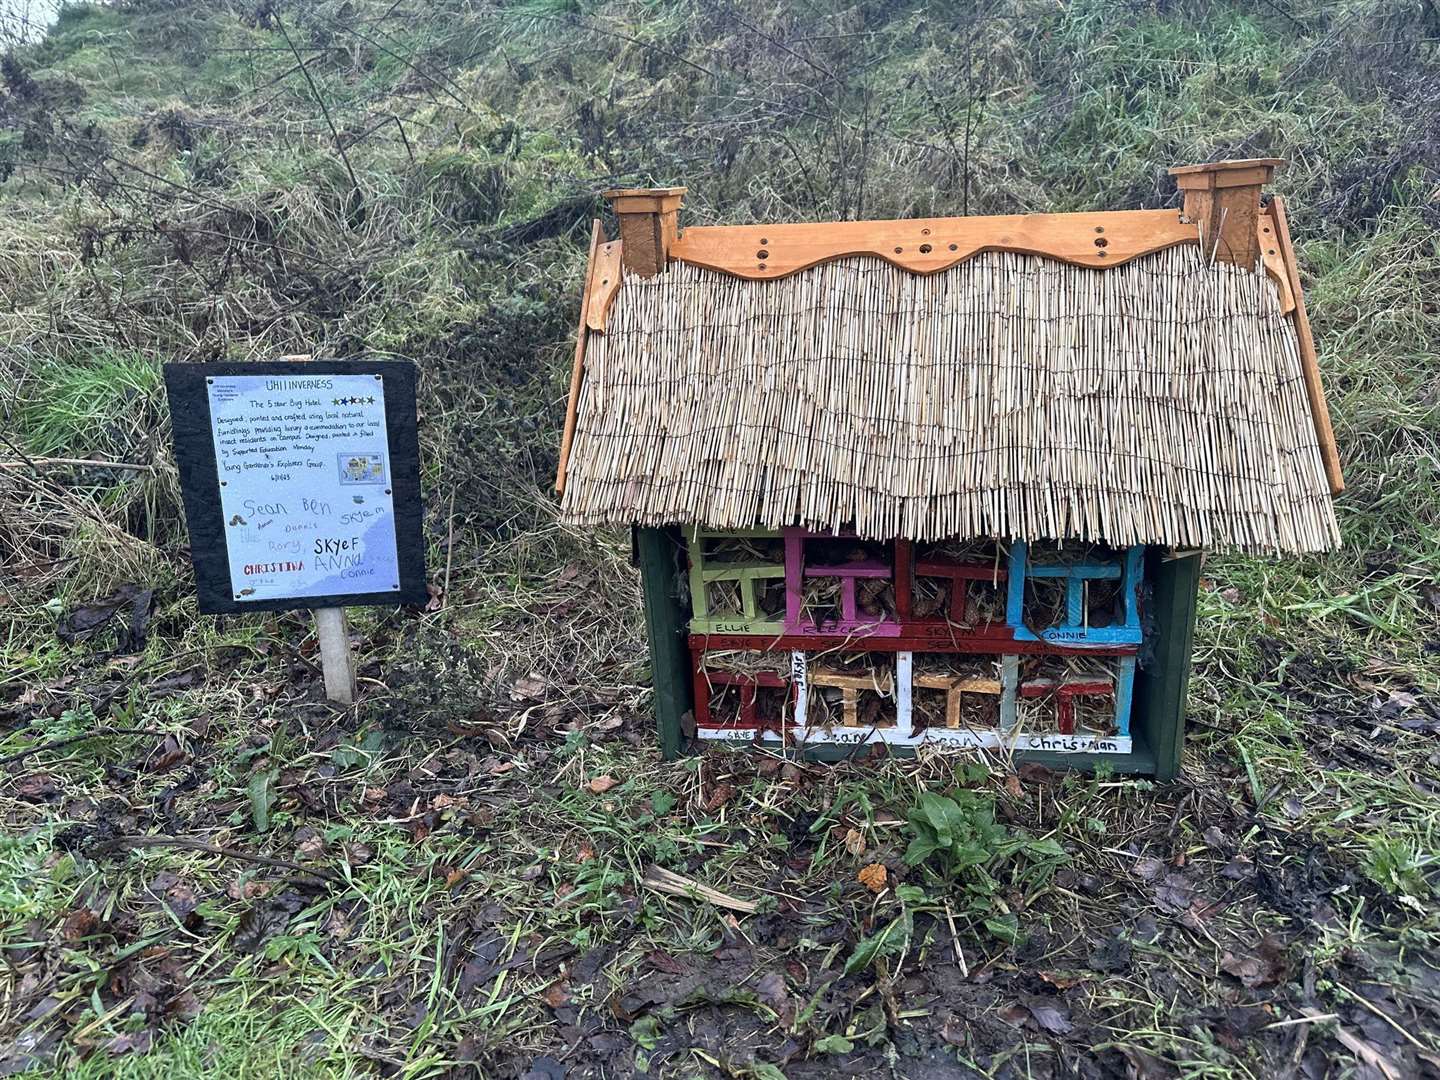 UHI Inverness gardening students have created bug hotels as well.